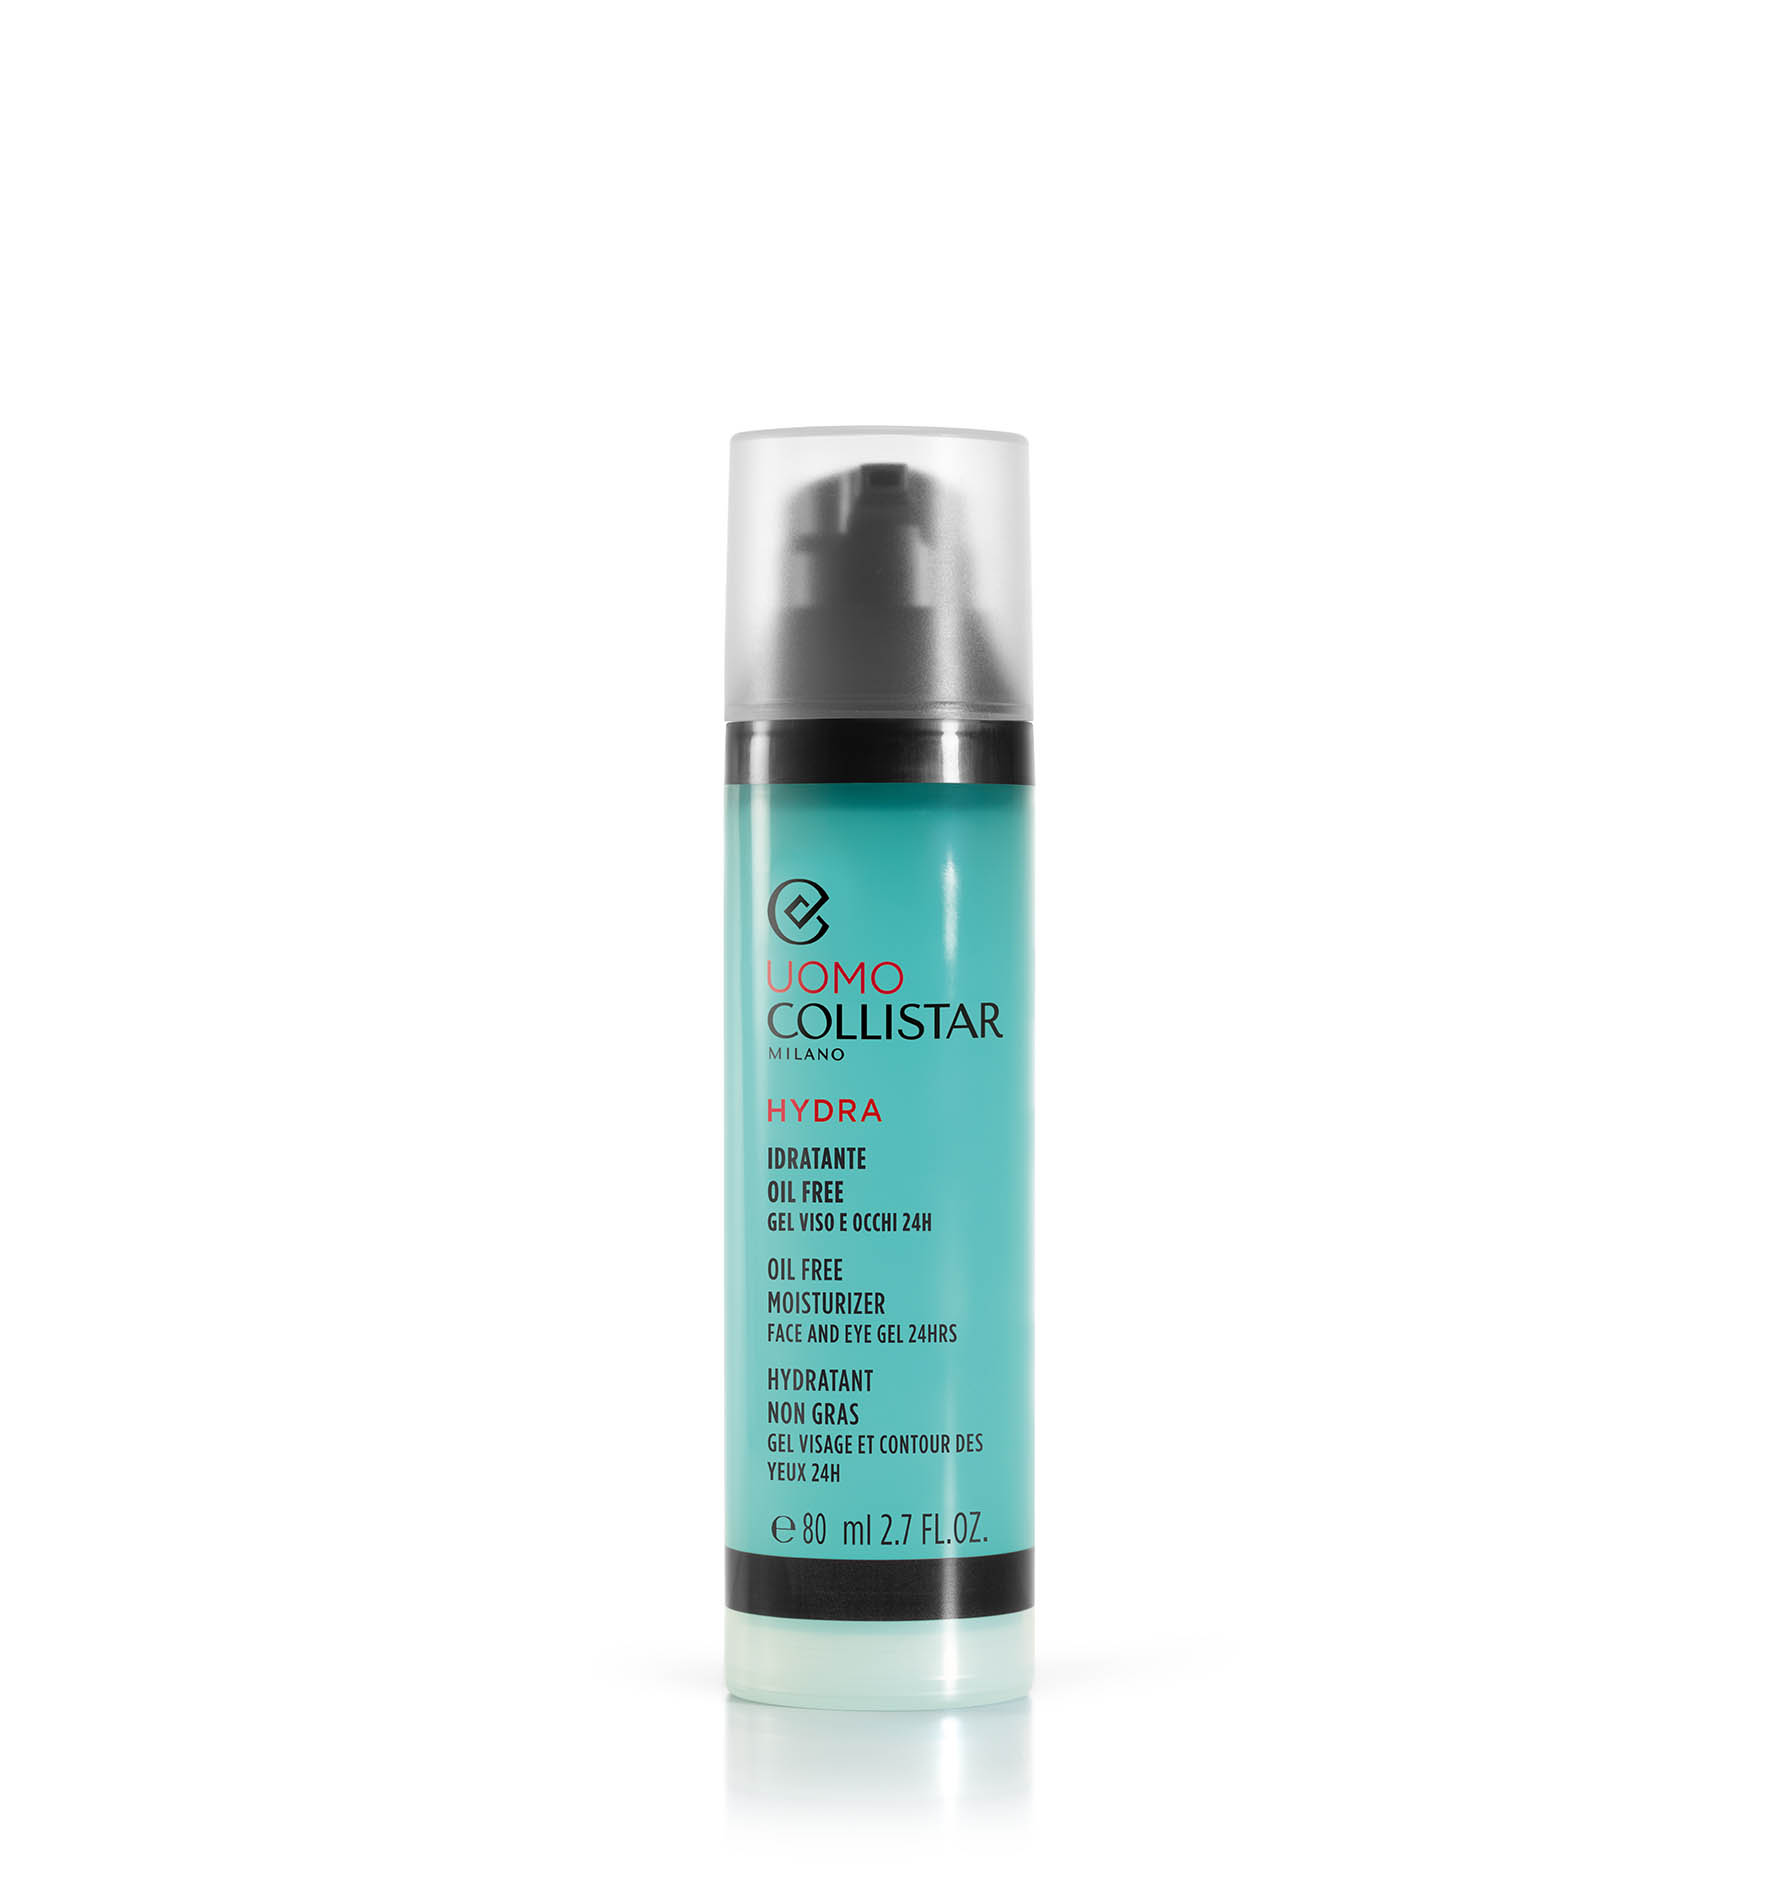 OIL FREE MOISTURIZER - Combination and oily skin | Collistar - Shop Online Ufficiale